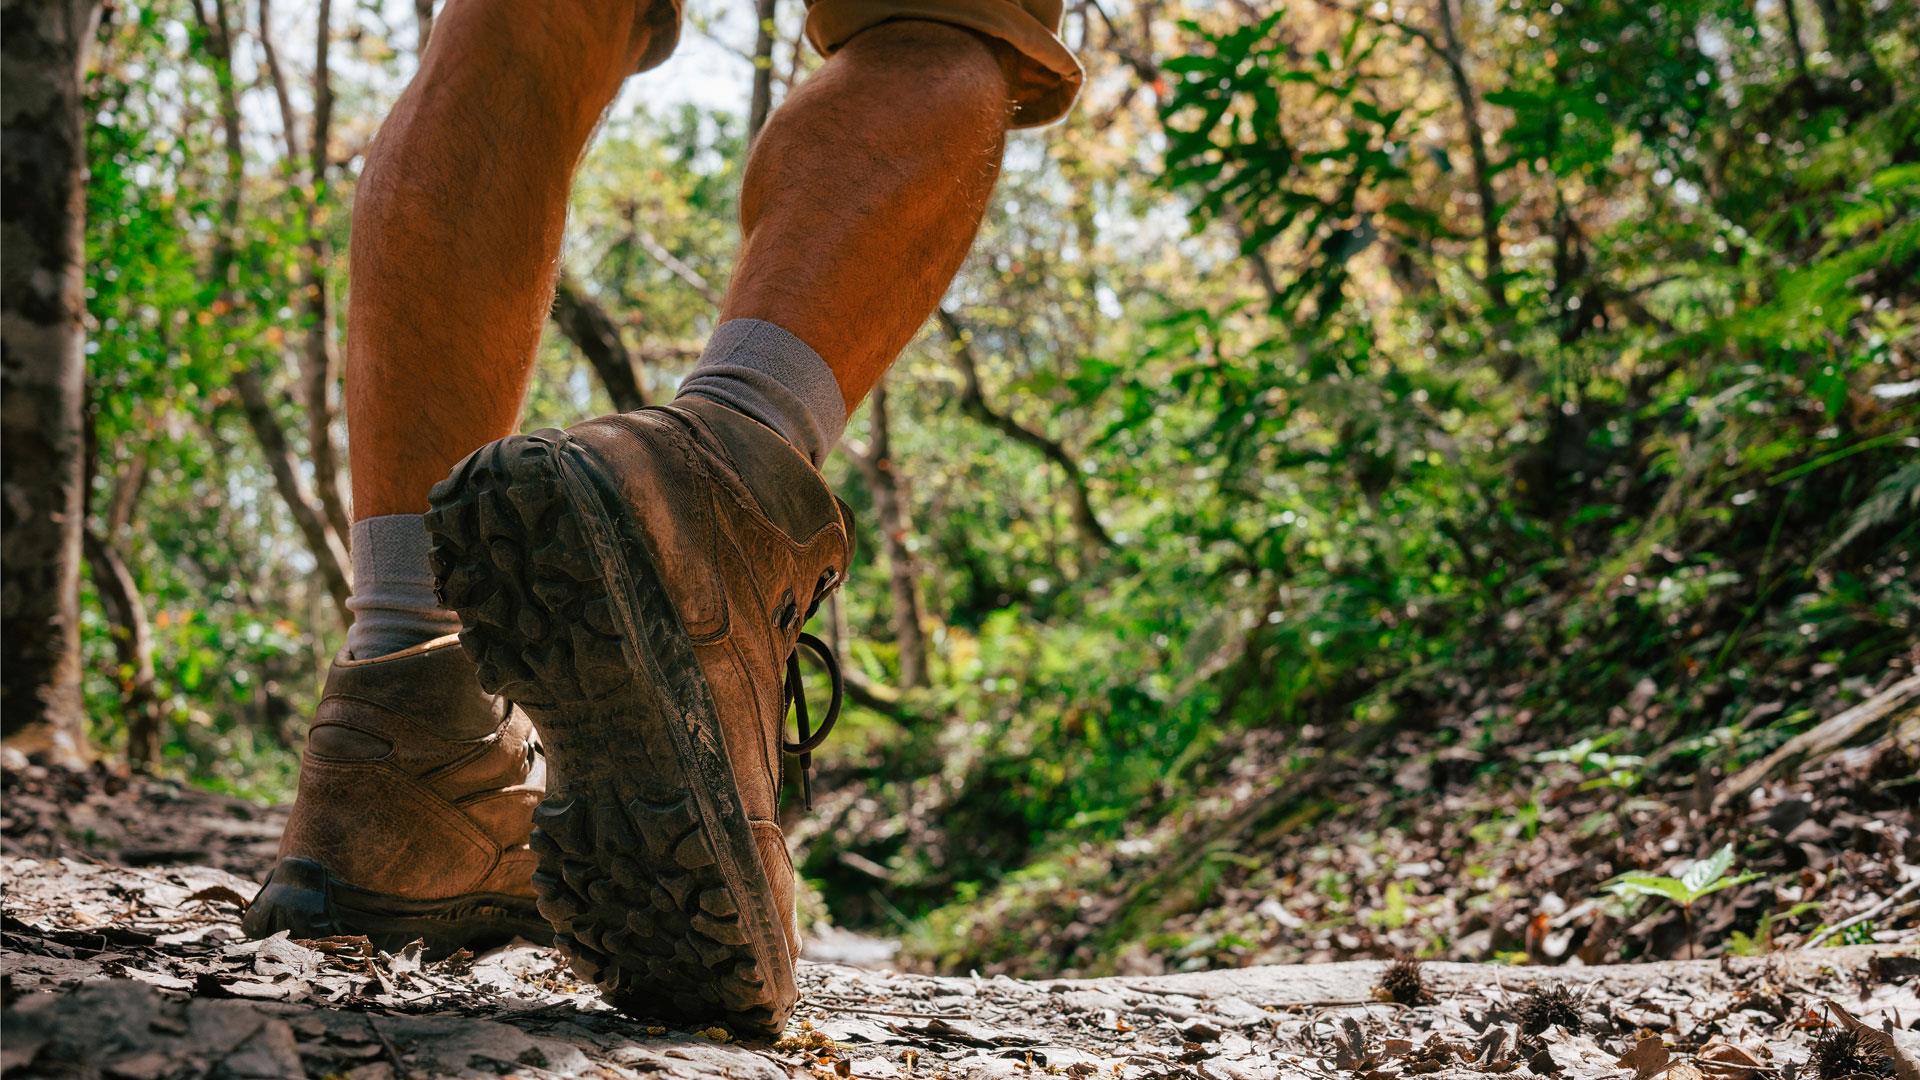 Expert Advice - How to choose trekking/hiking shoes